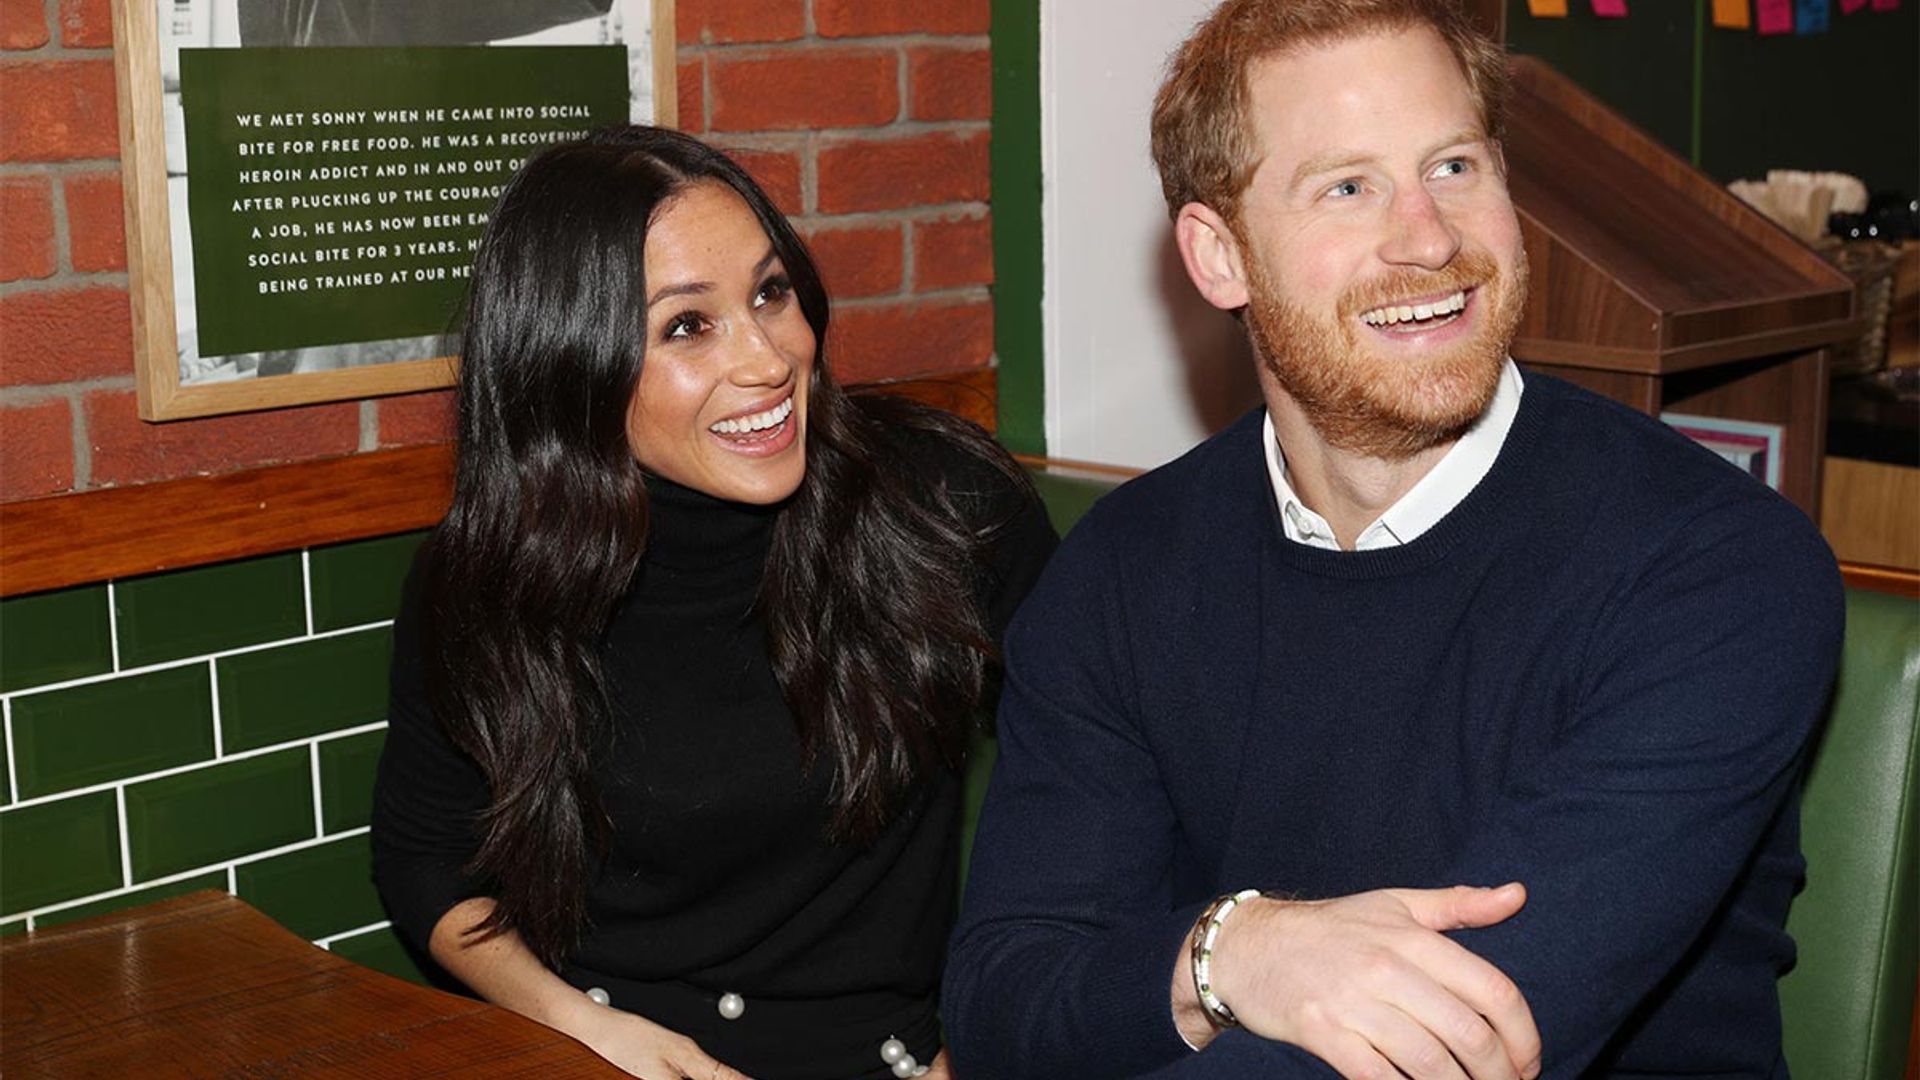 Prince Harry and Meghan Markle's podcast: which celebrities could be their guests?